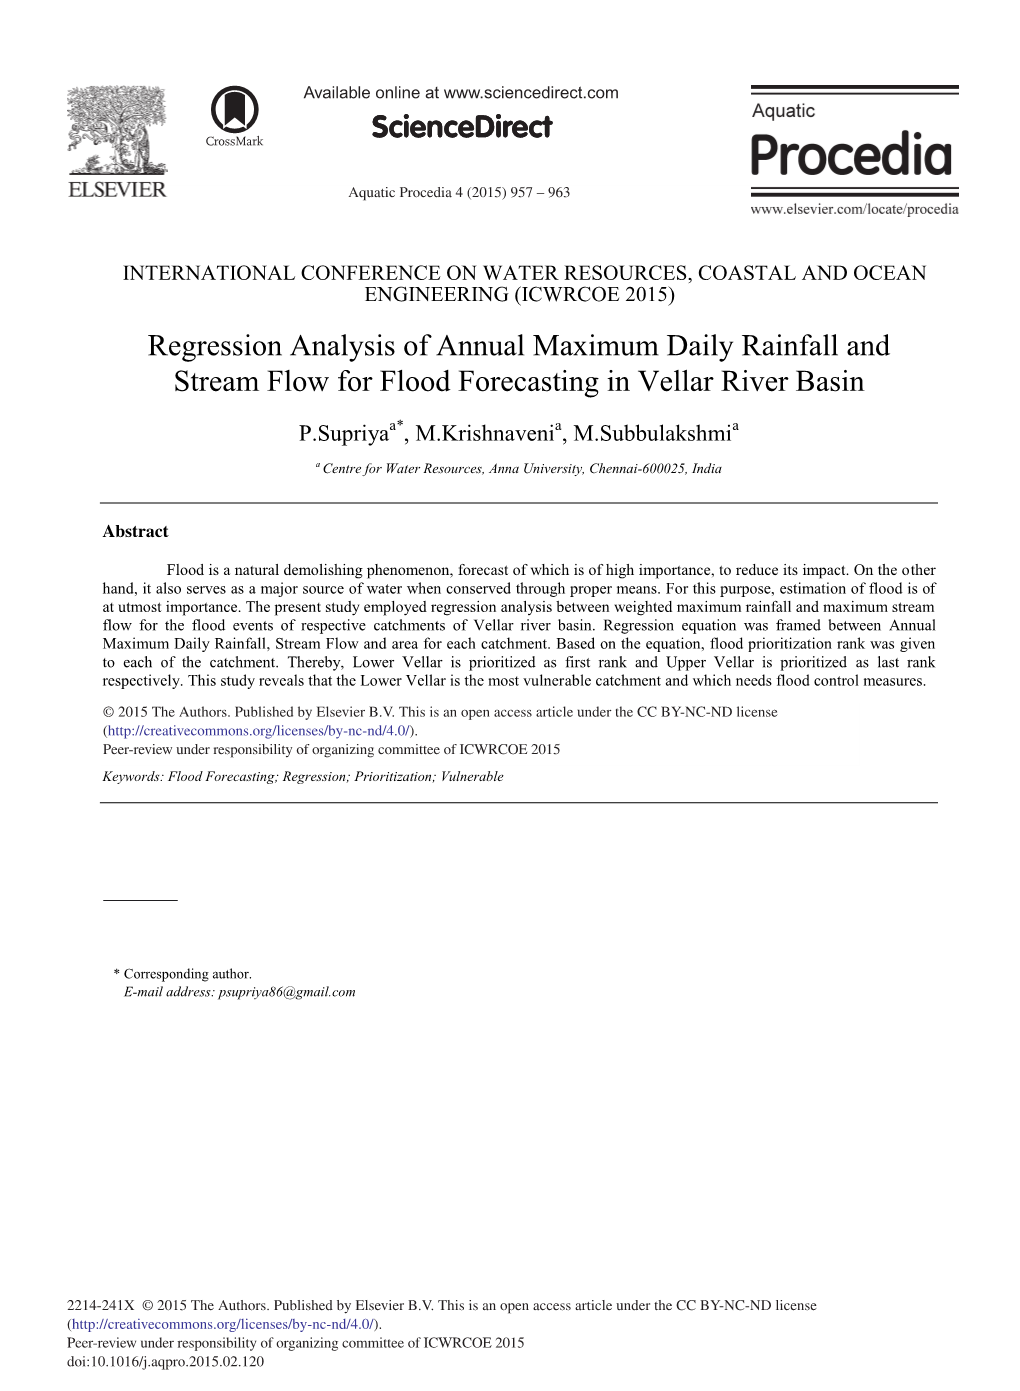 Regression Analysis of Annual Maximum Daily Rainfall and Stream Flow for Flood Forecasting in Vellar River Basin